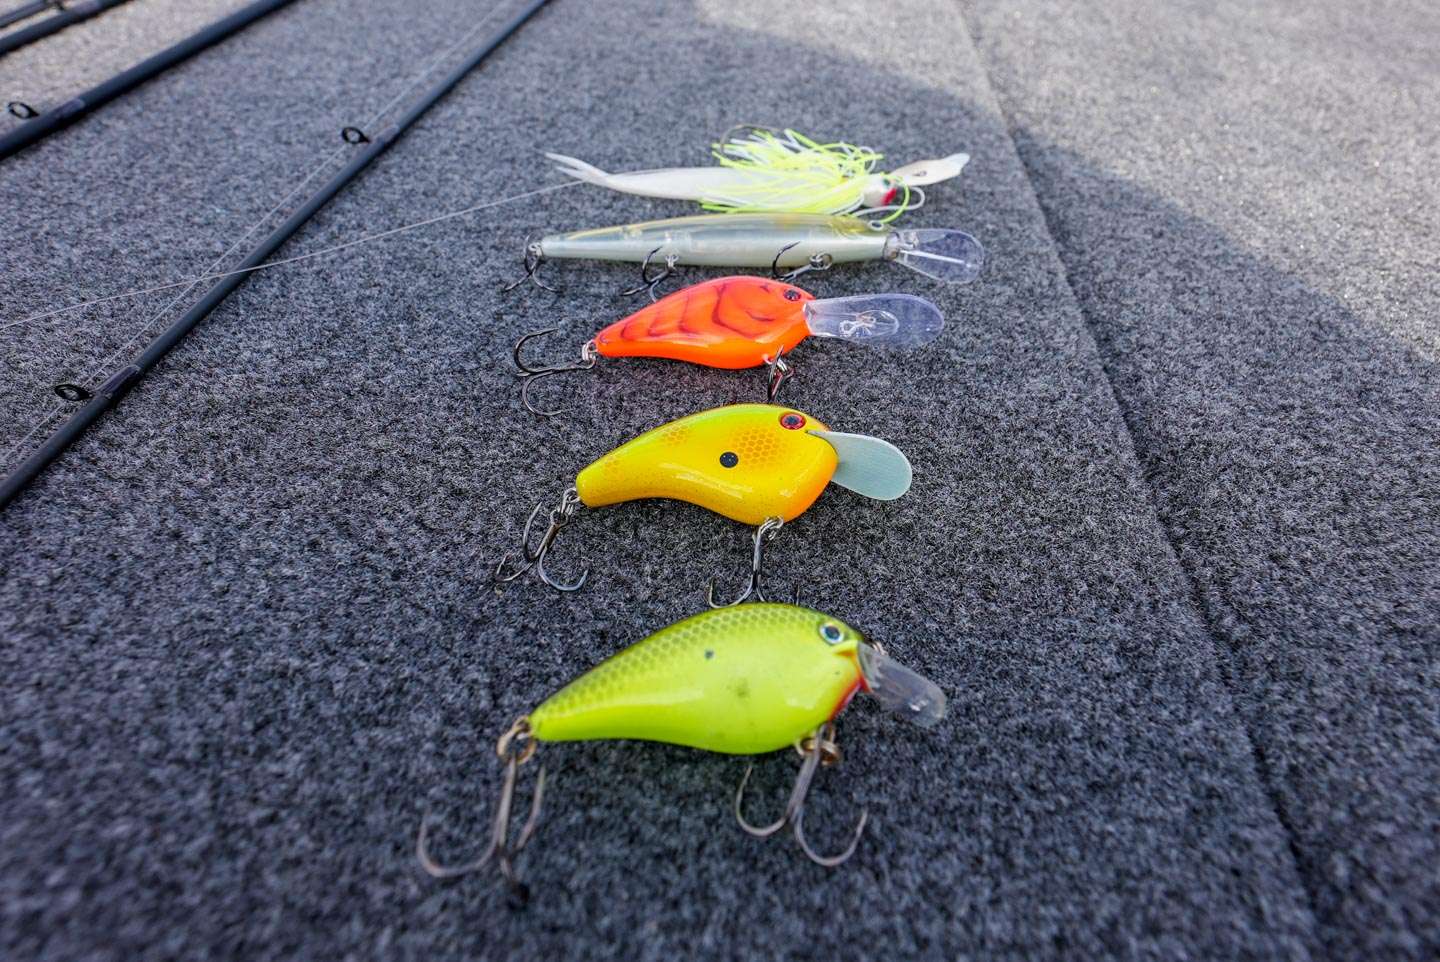 There you have it! The full lineup of Josh Stracner's five favorite prespawn reaction baits. 